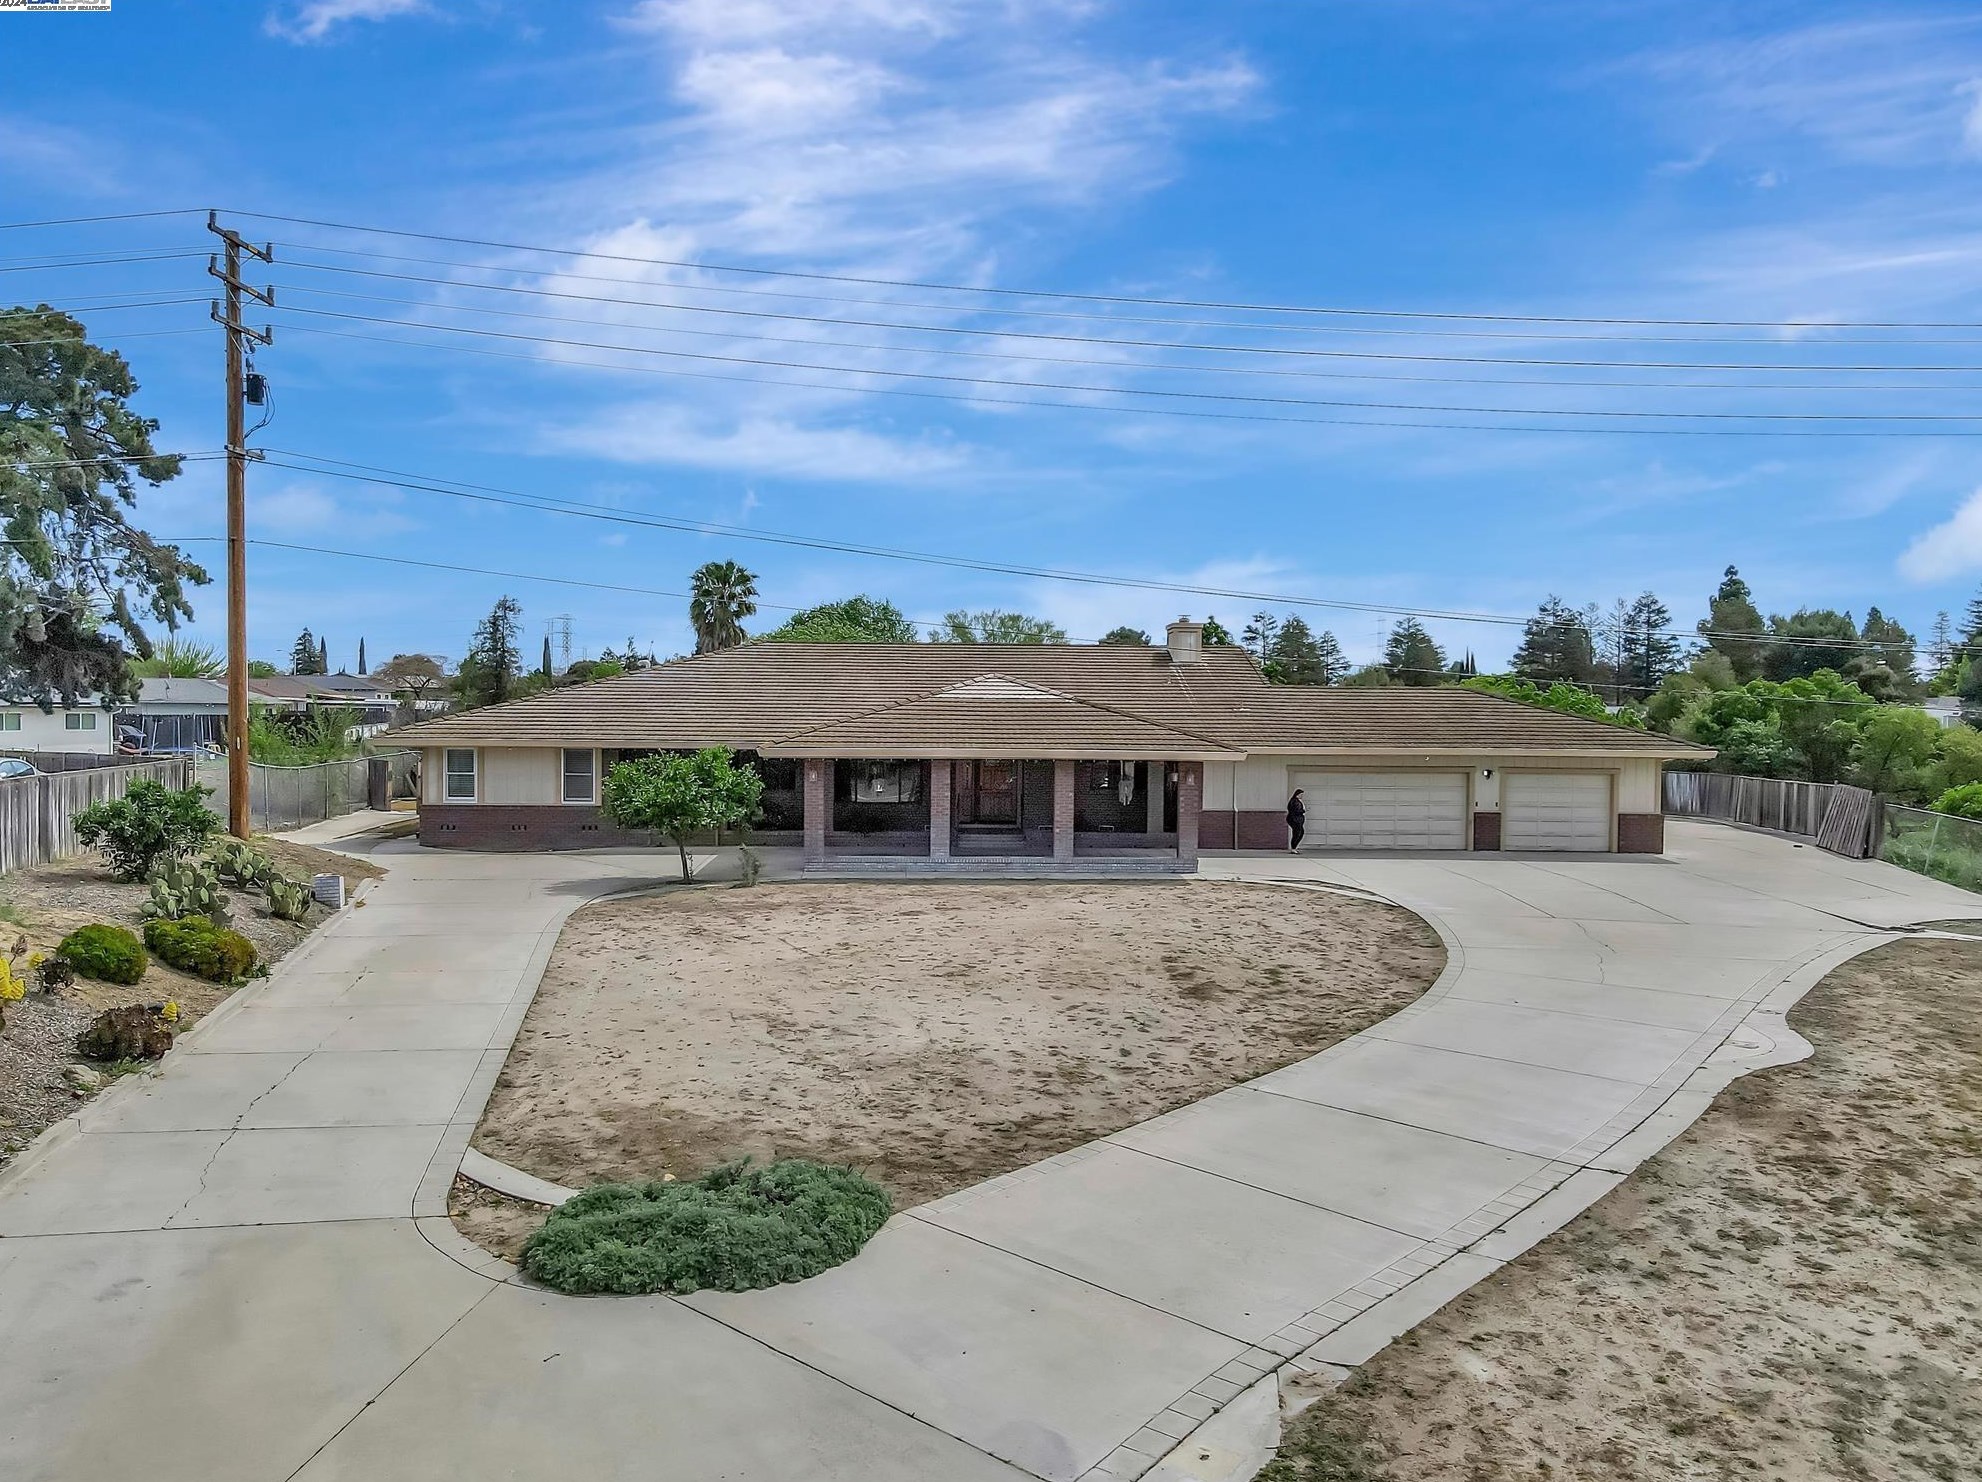 1525 Hillcrest Ave, Antioch, CA 94509